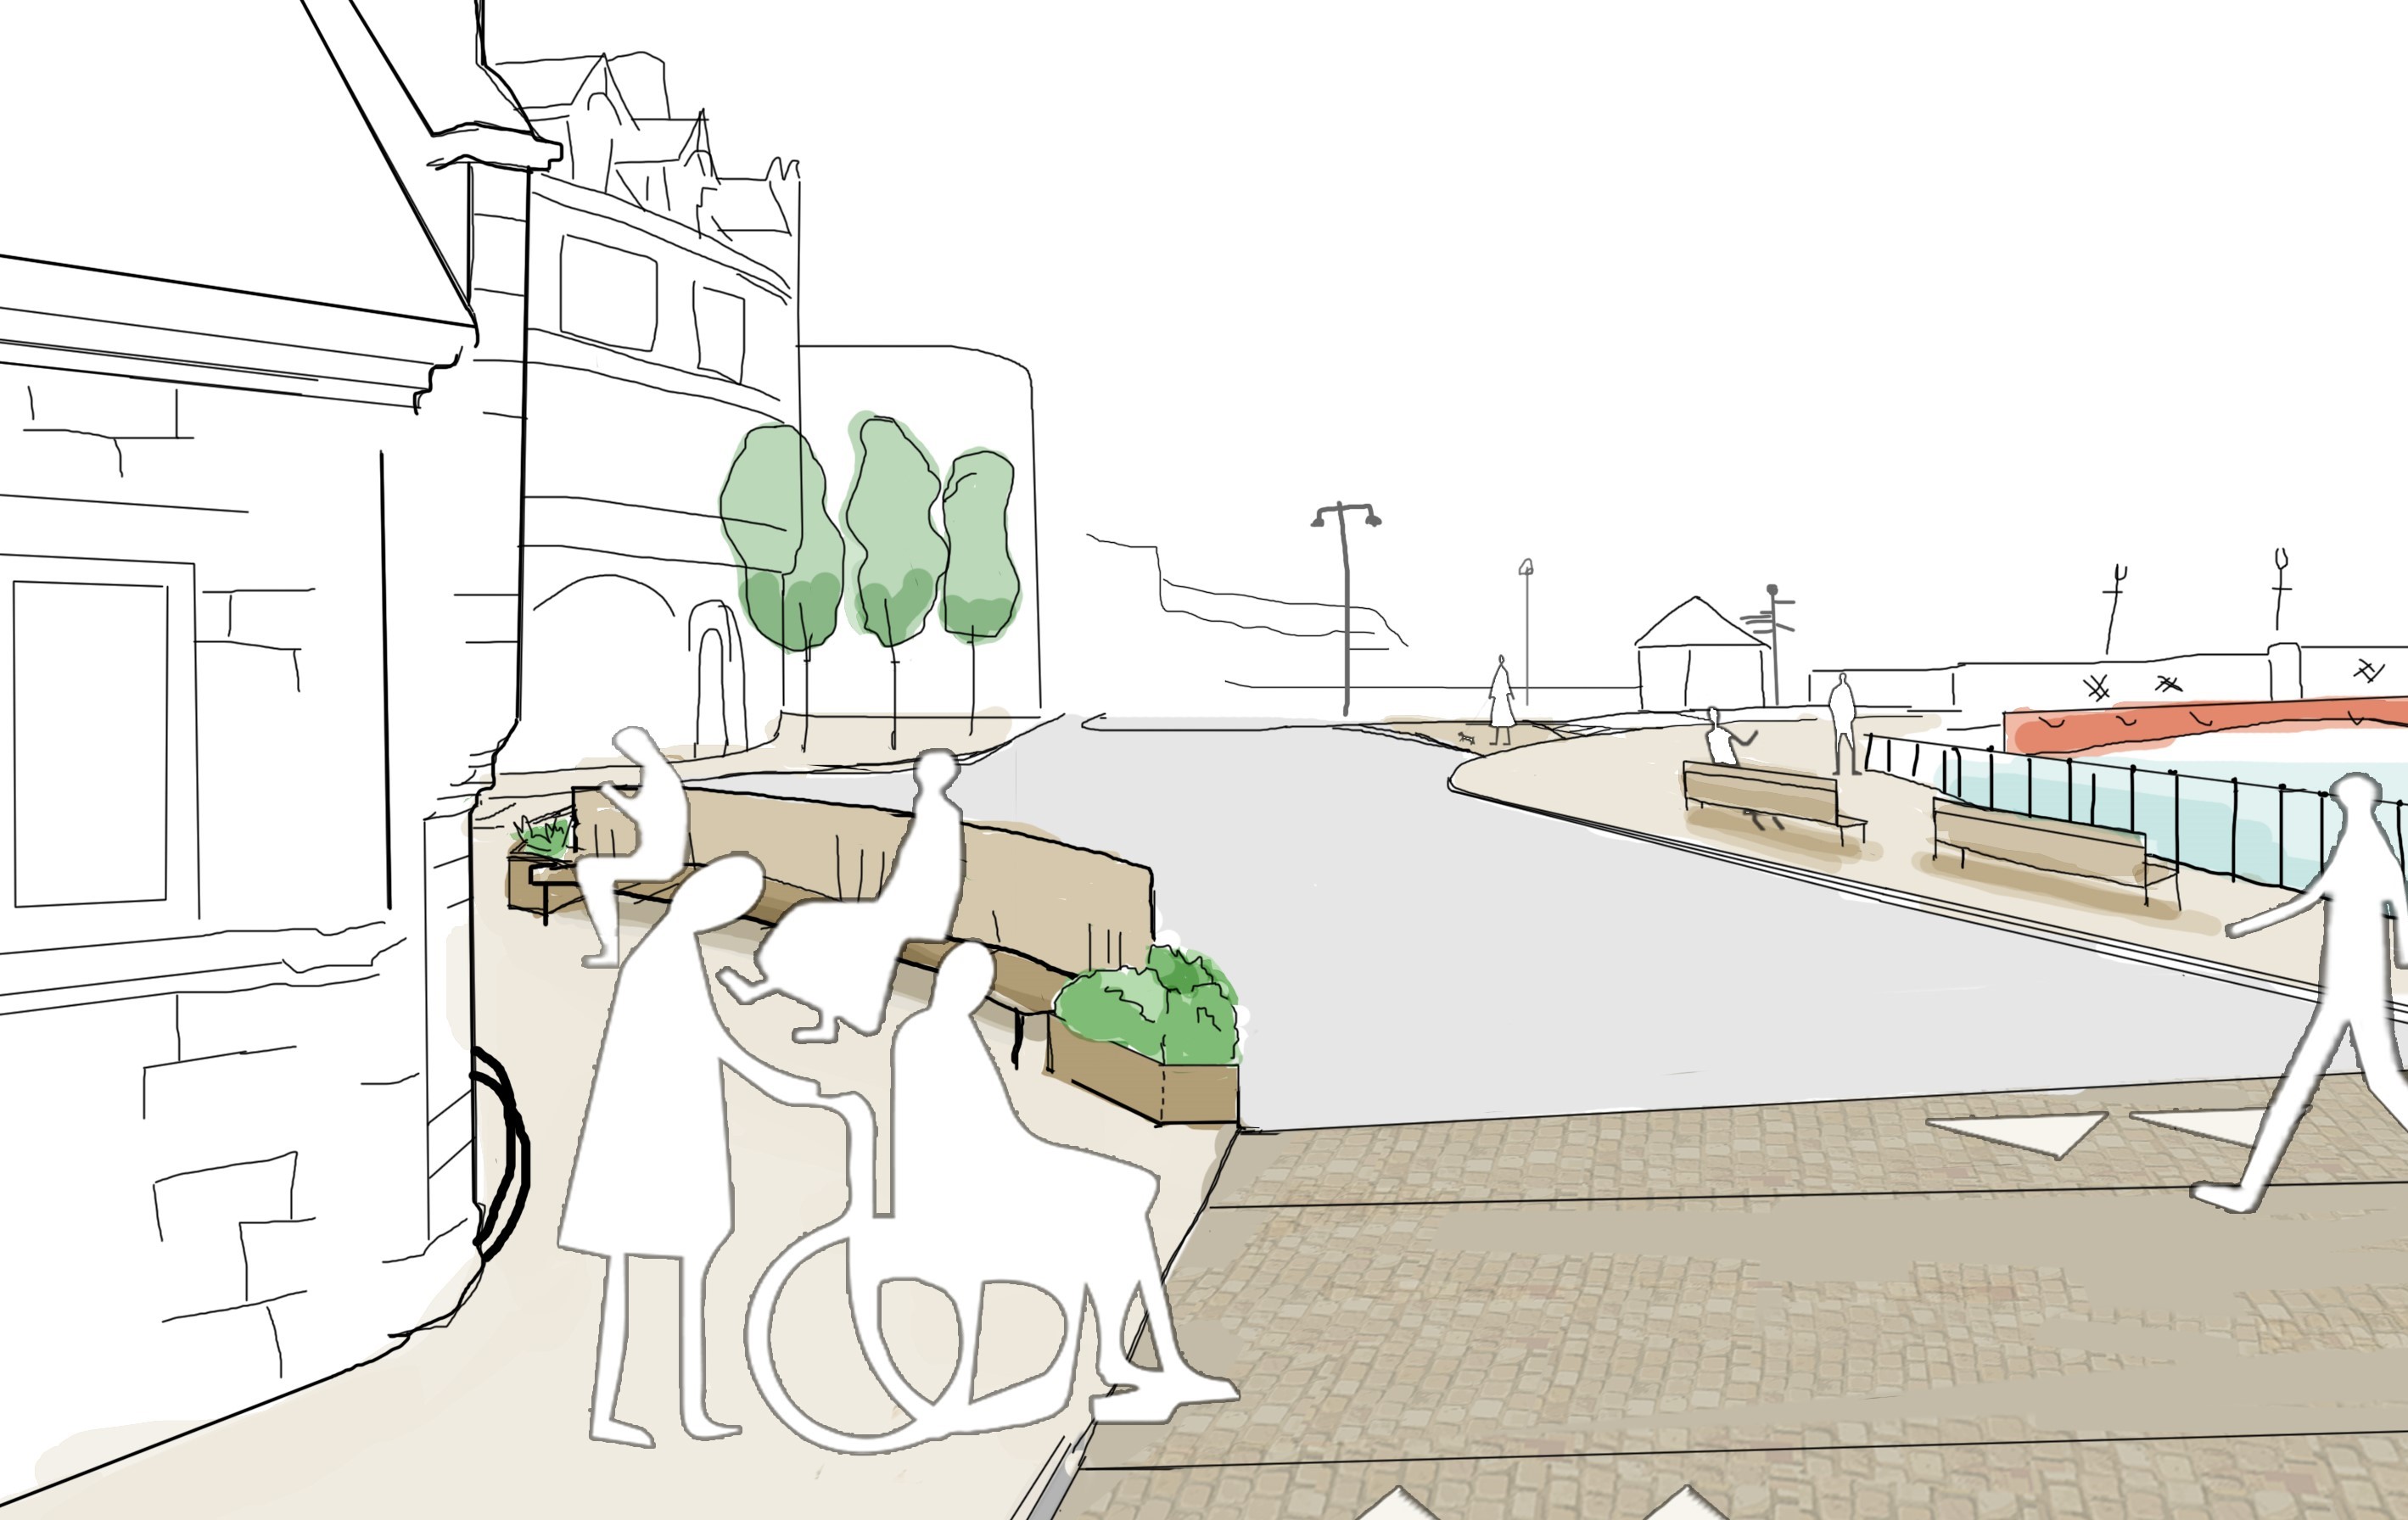 An artist impression of the proposed changes in Whitby